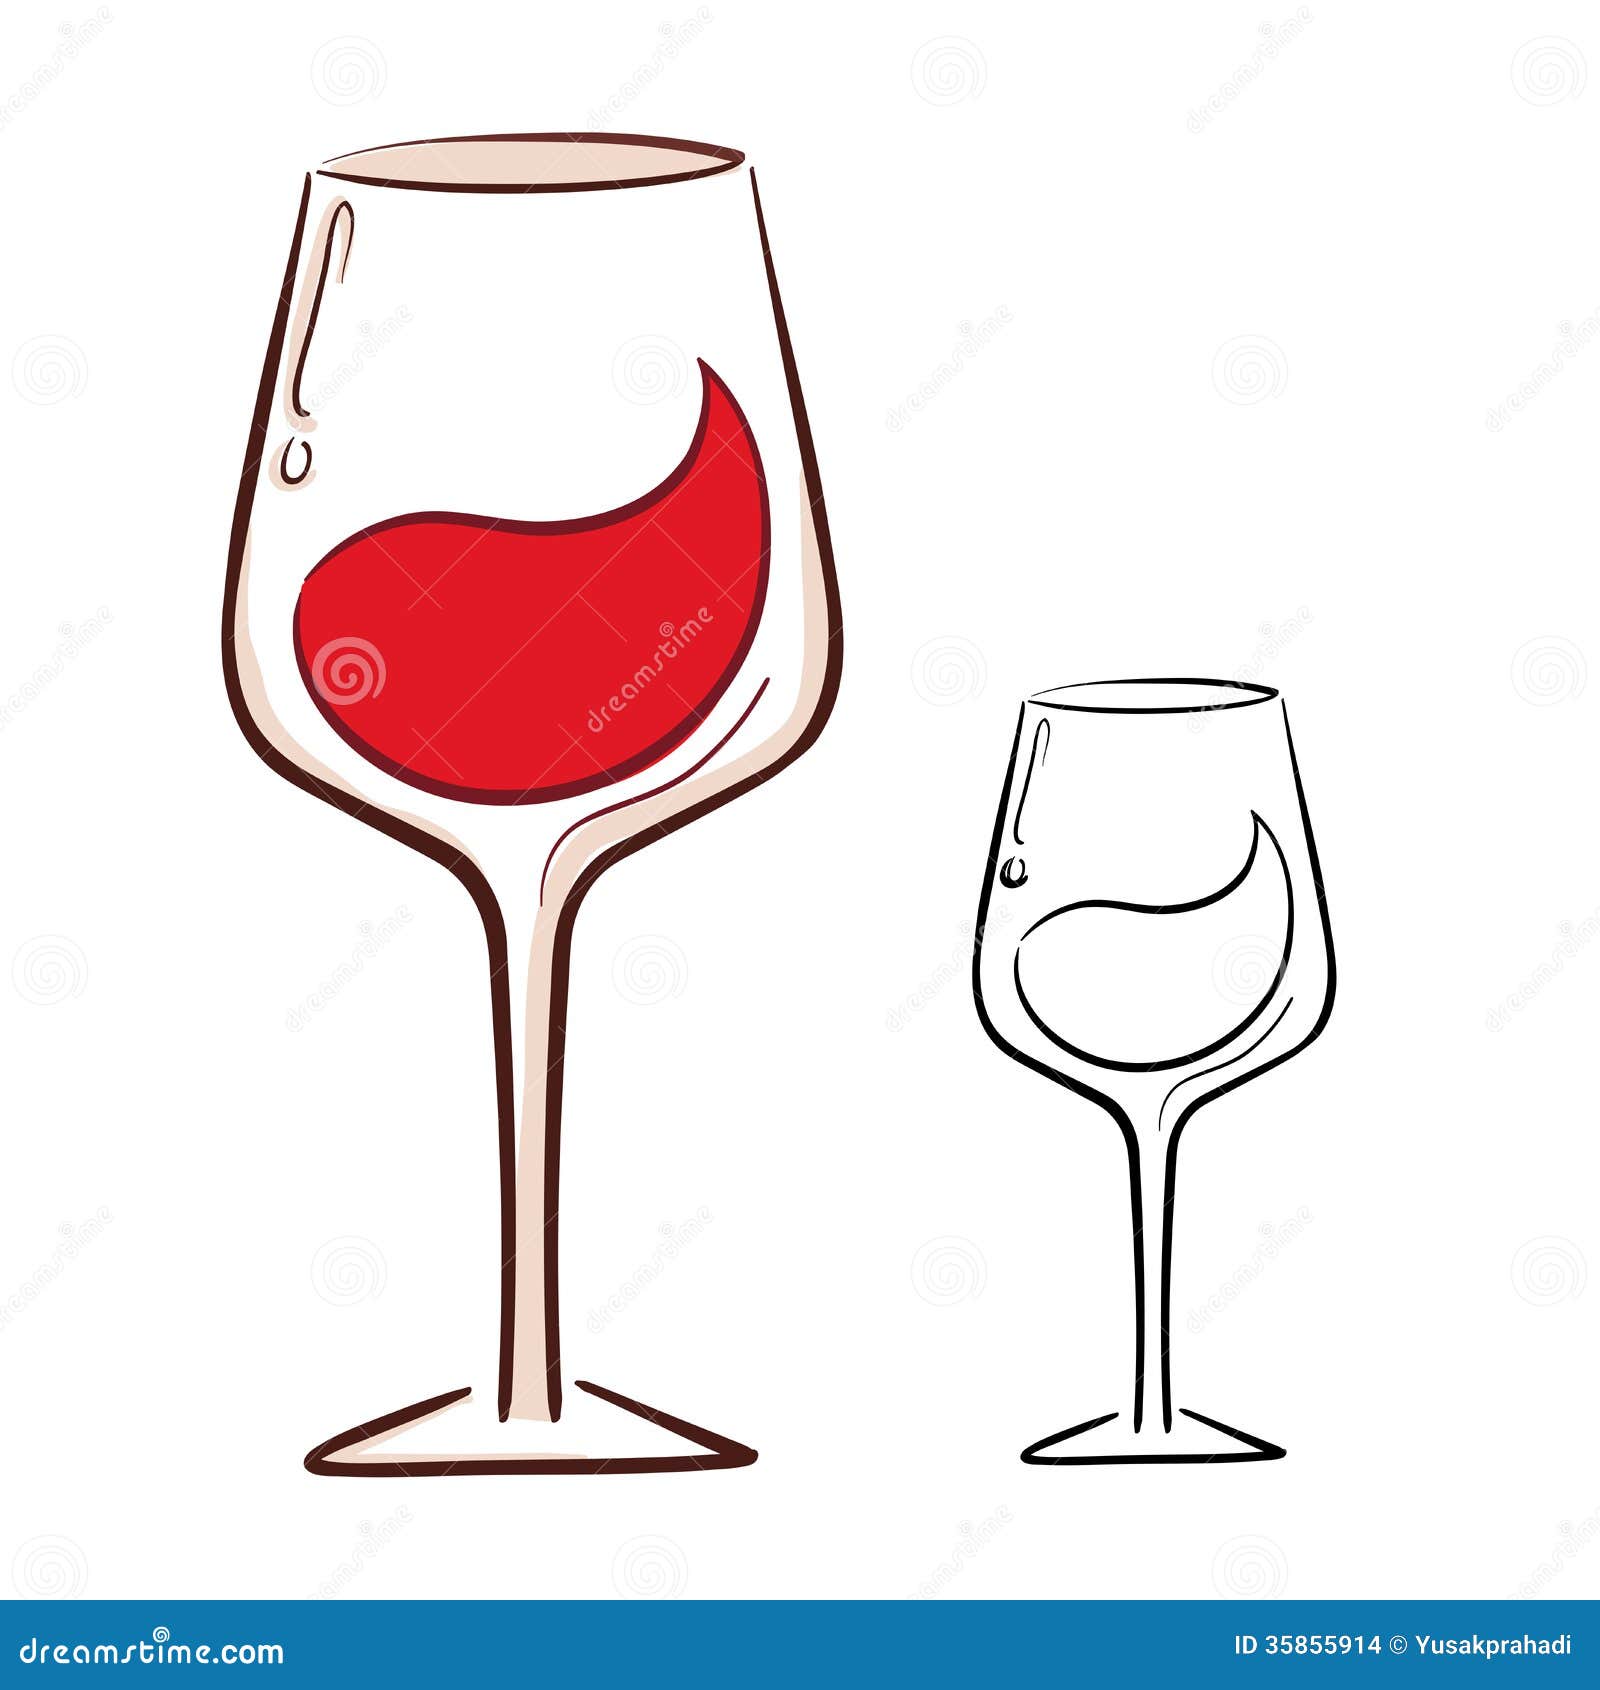 clipart party wine glass - photo #31